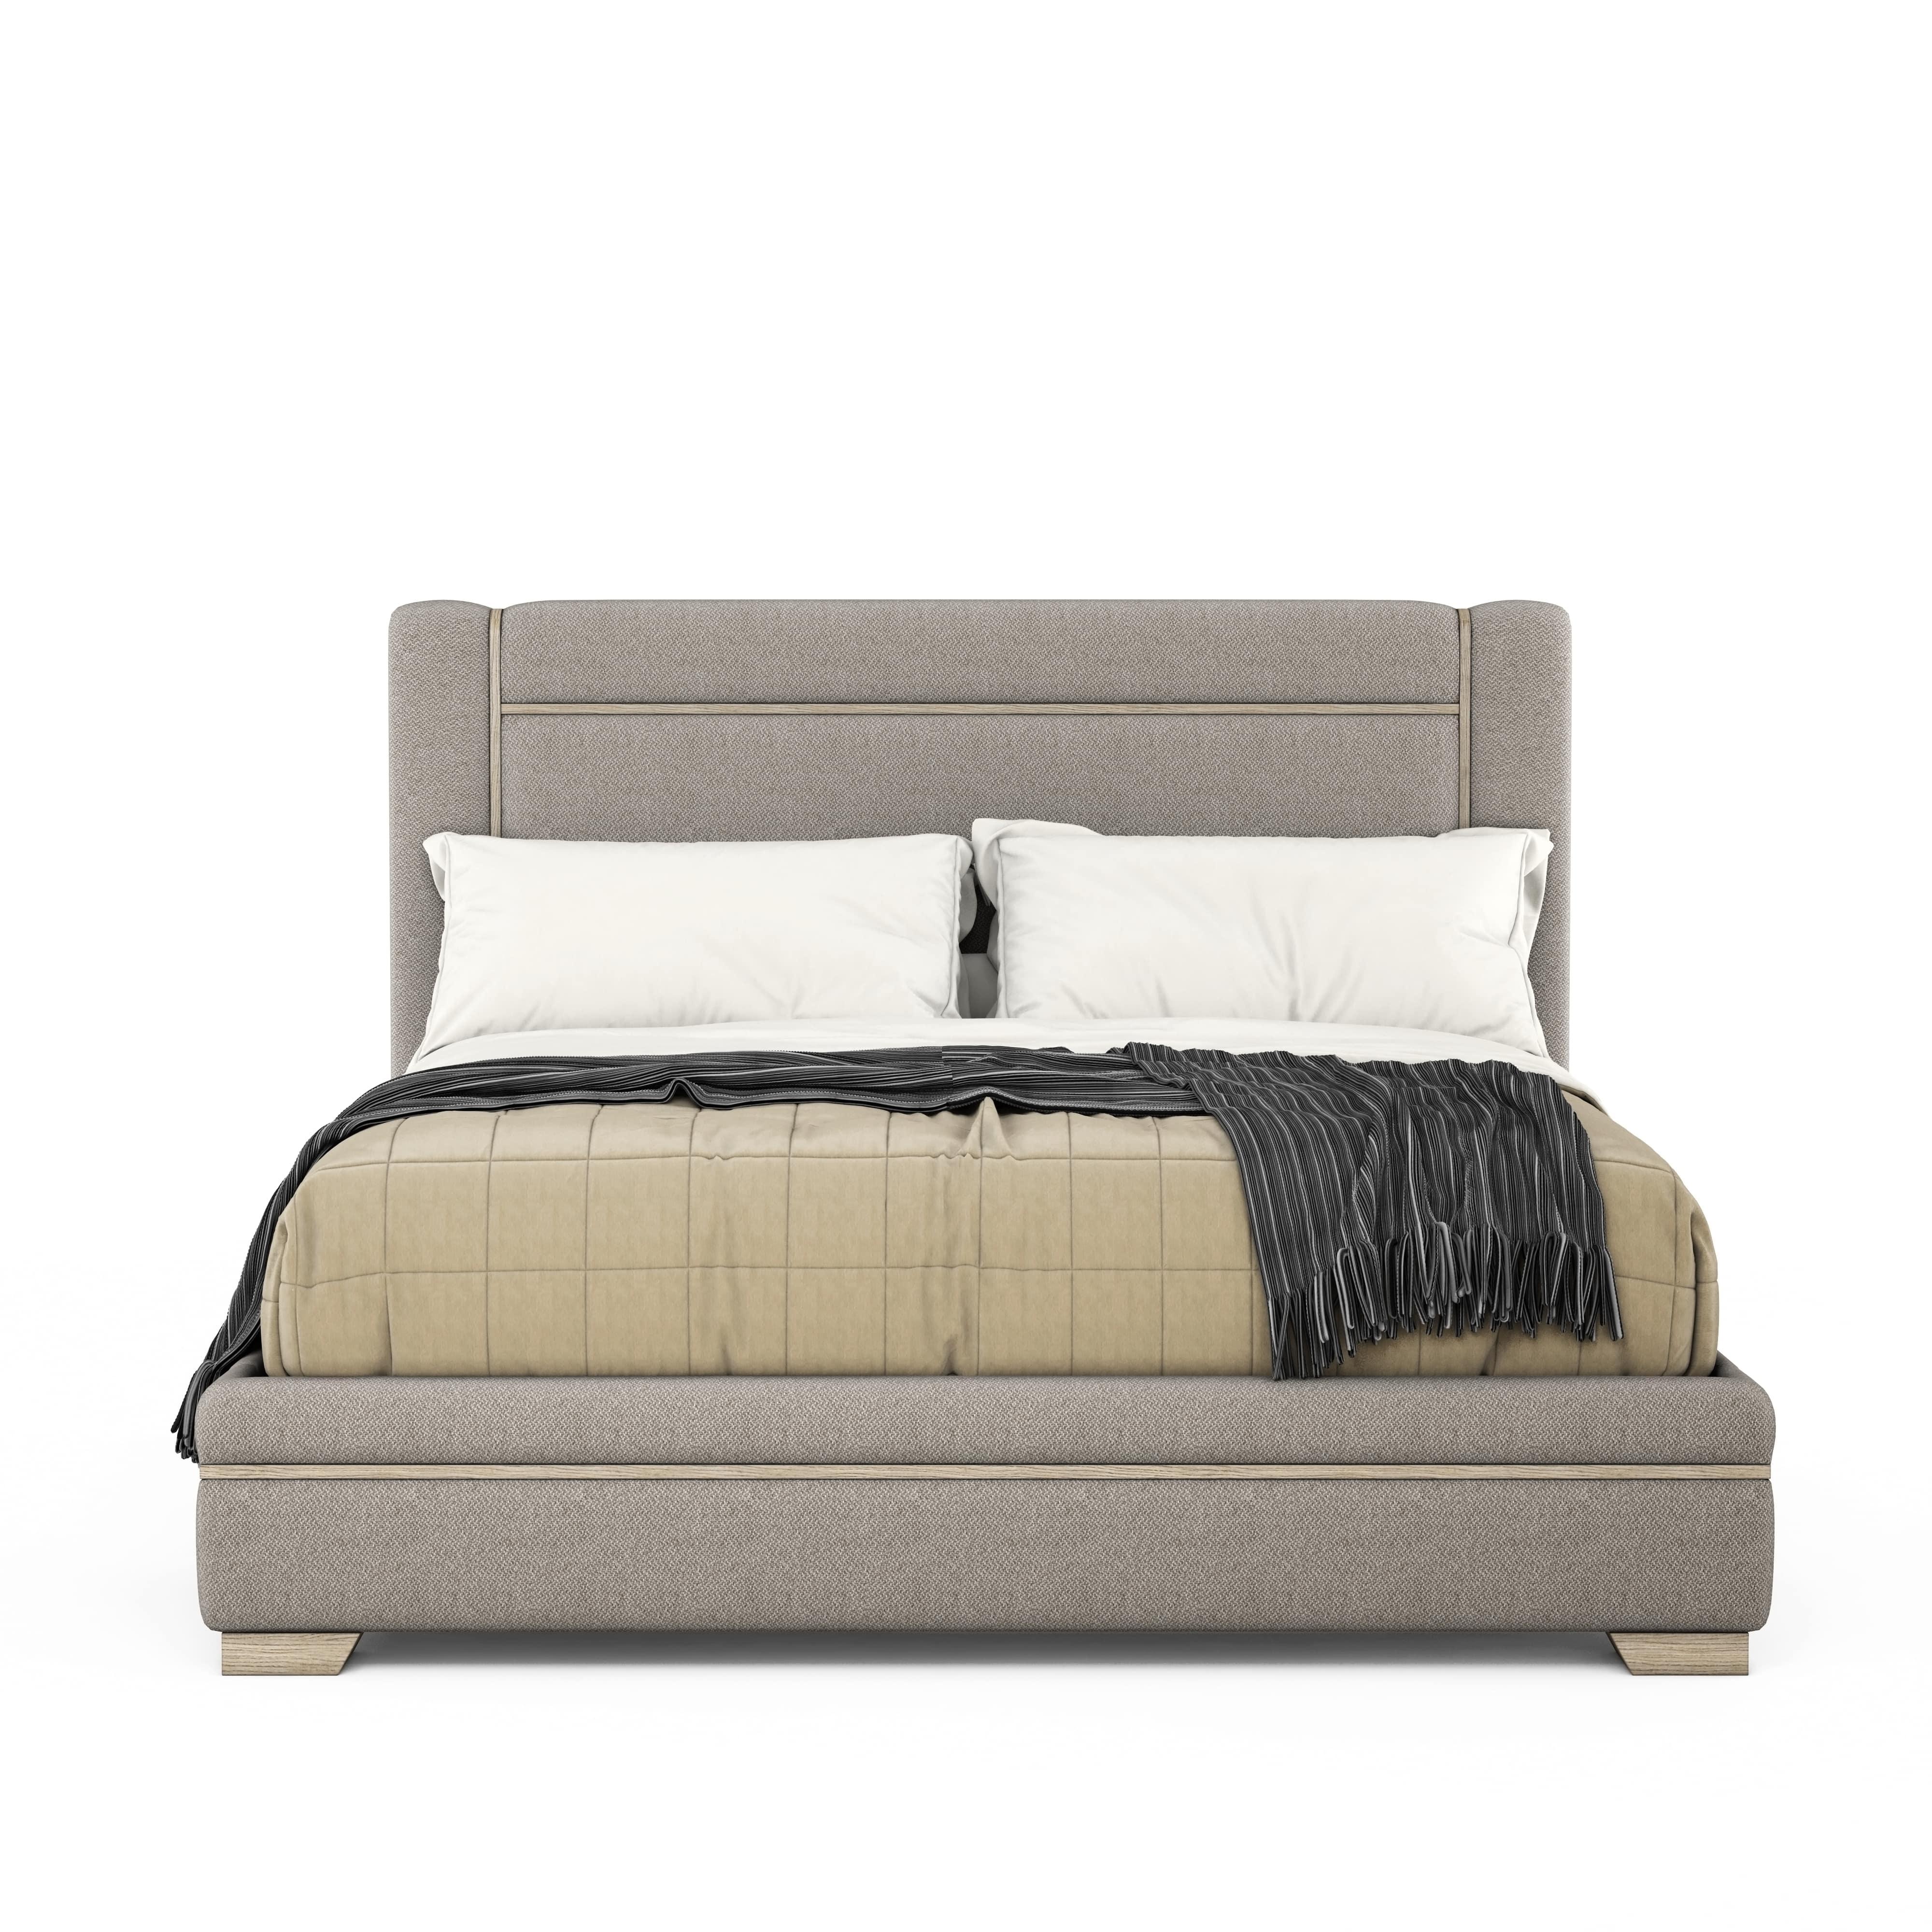 Modern, Transitional Platform Bed North Side 269126-2556 in Light Gray Fabric